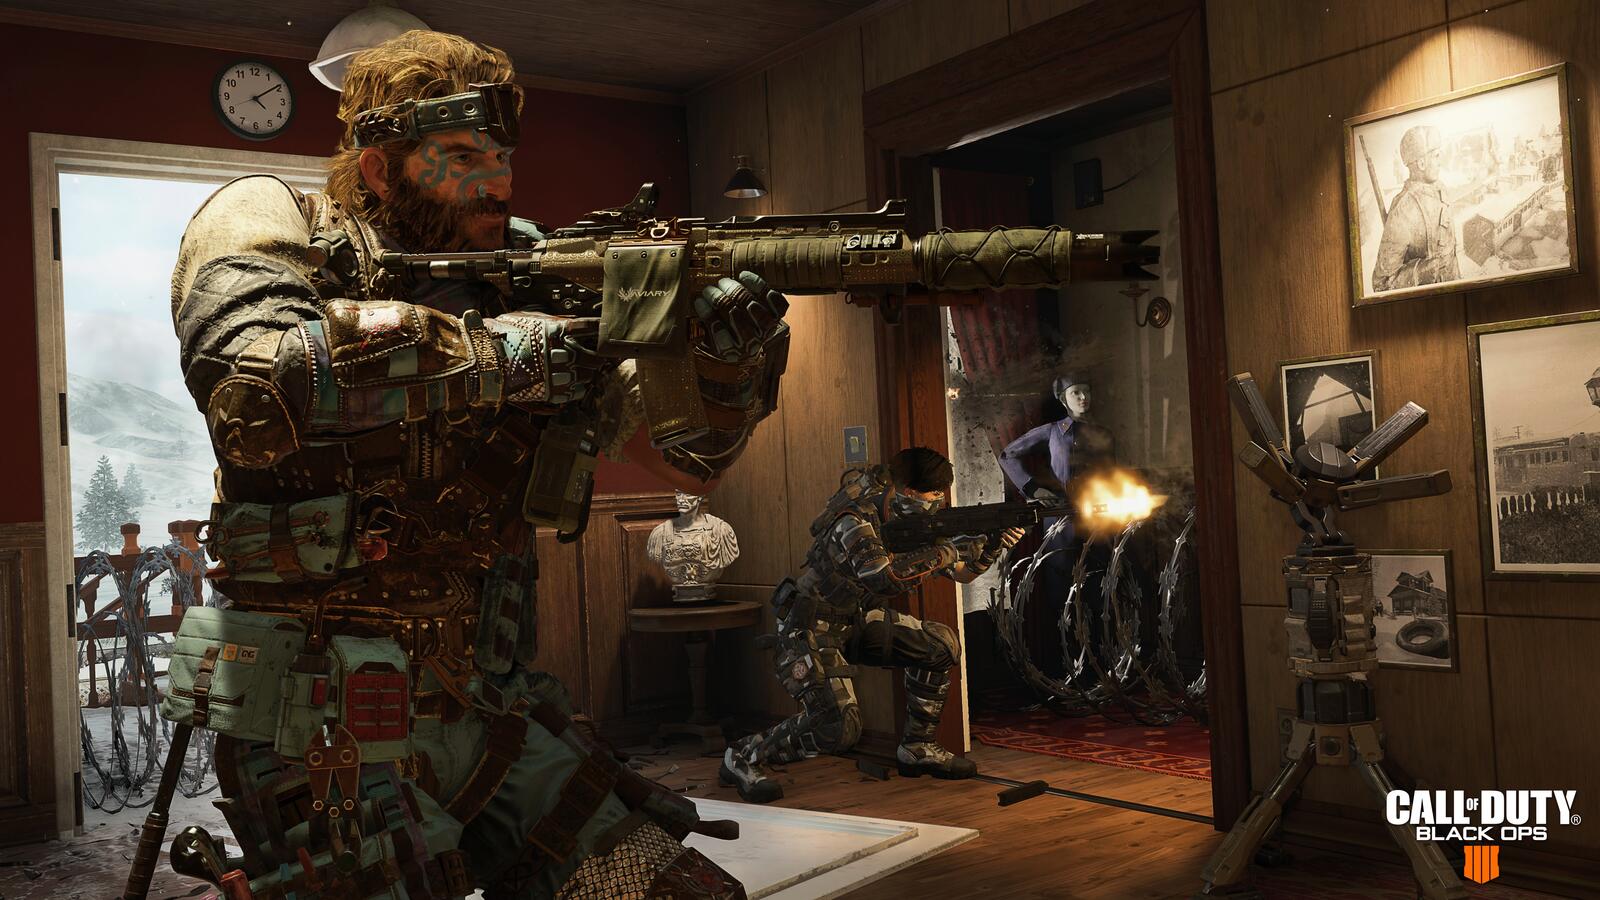 Wallpapers call of duty black ops 4 weapons the 2018 Games on the desktop